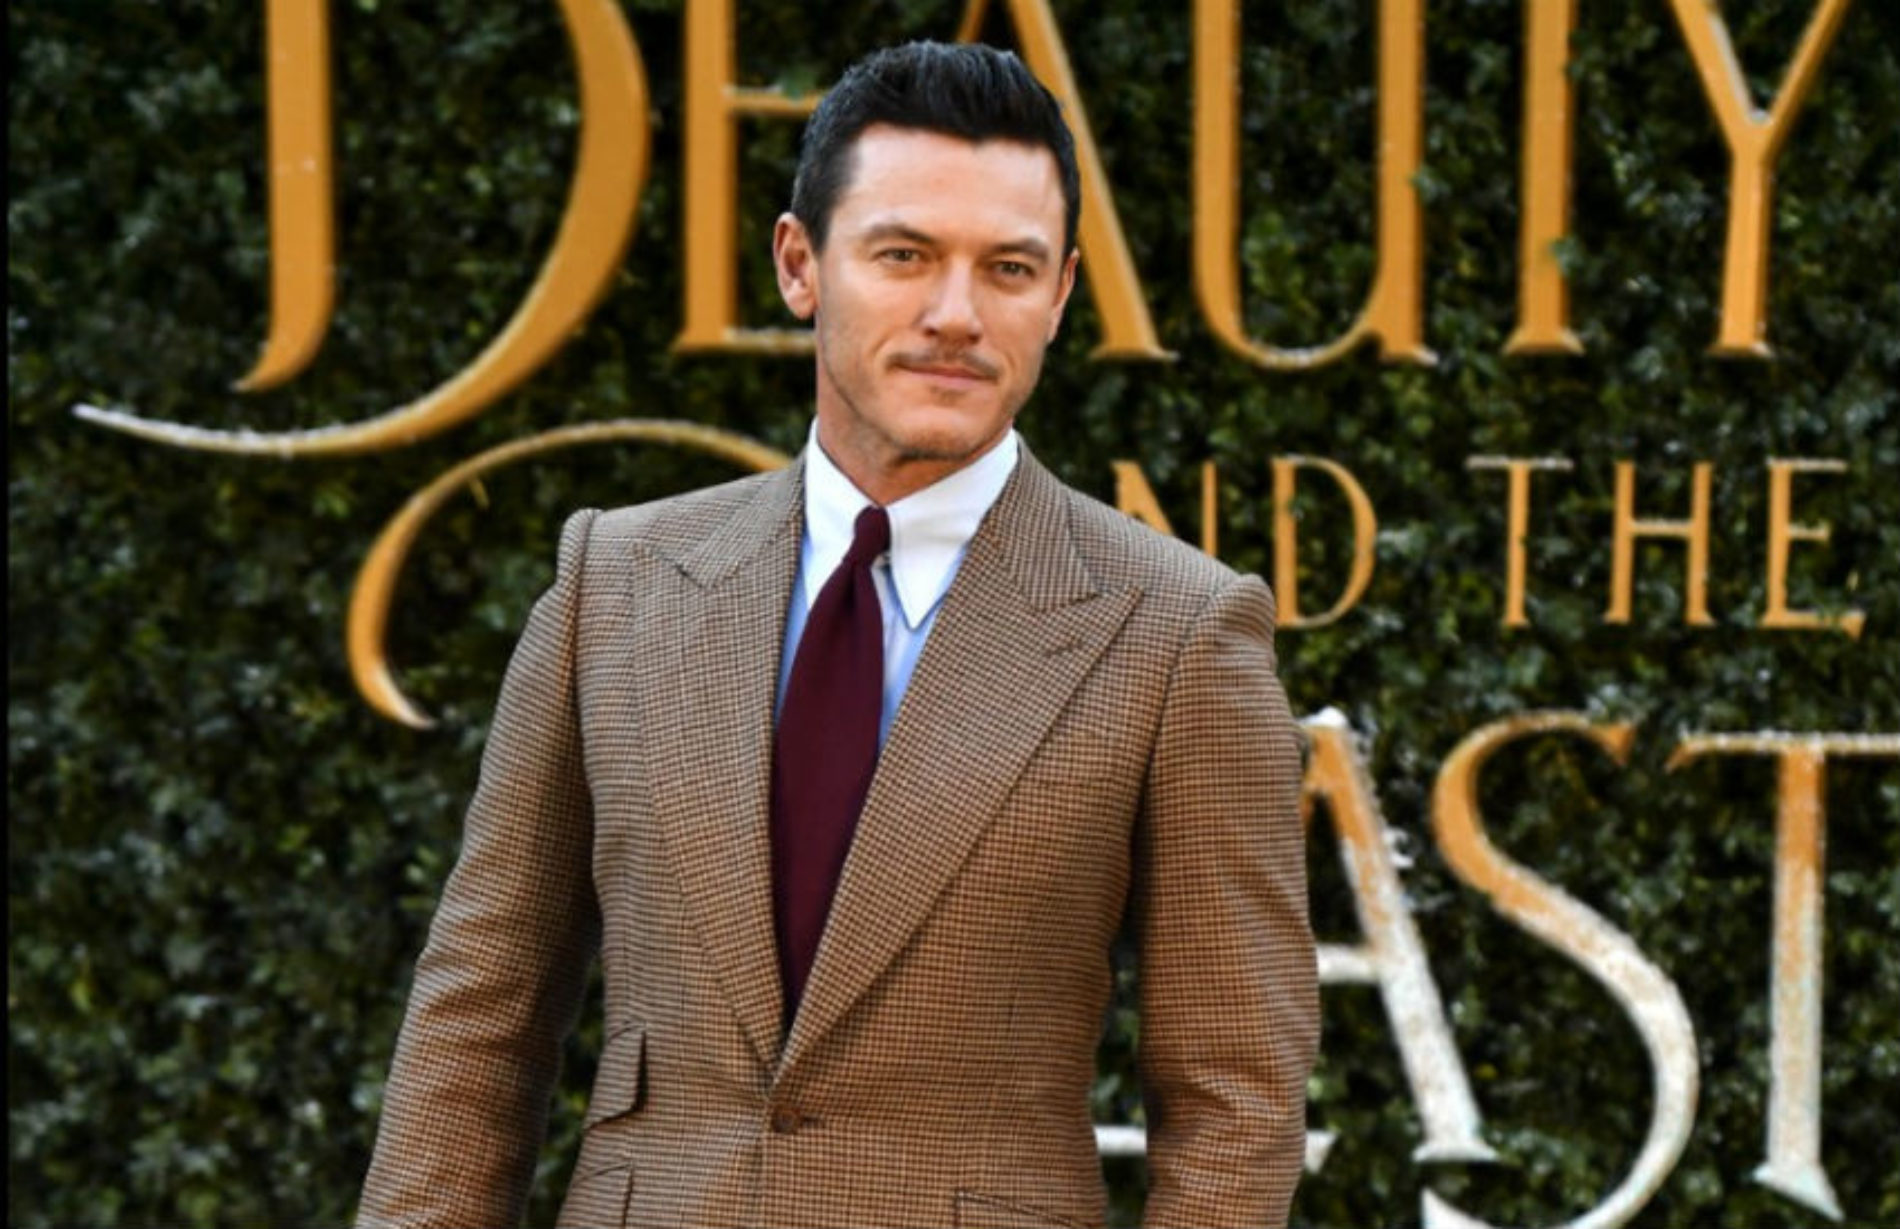 Luke Evans believes being openly gay hasn’t negatively affected his career